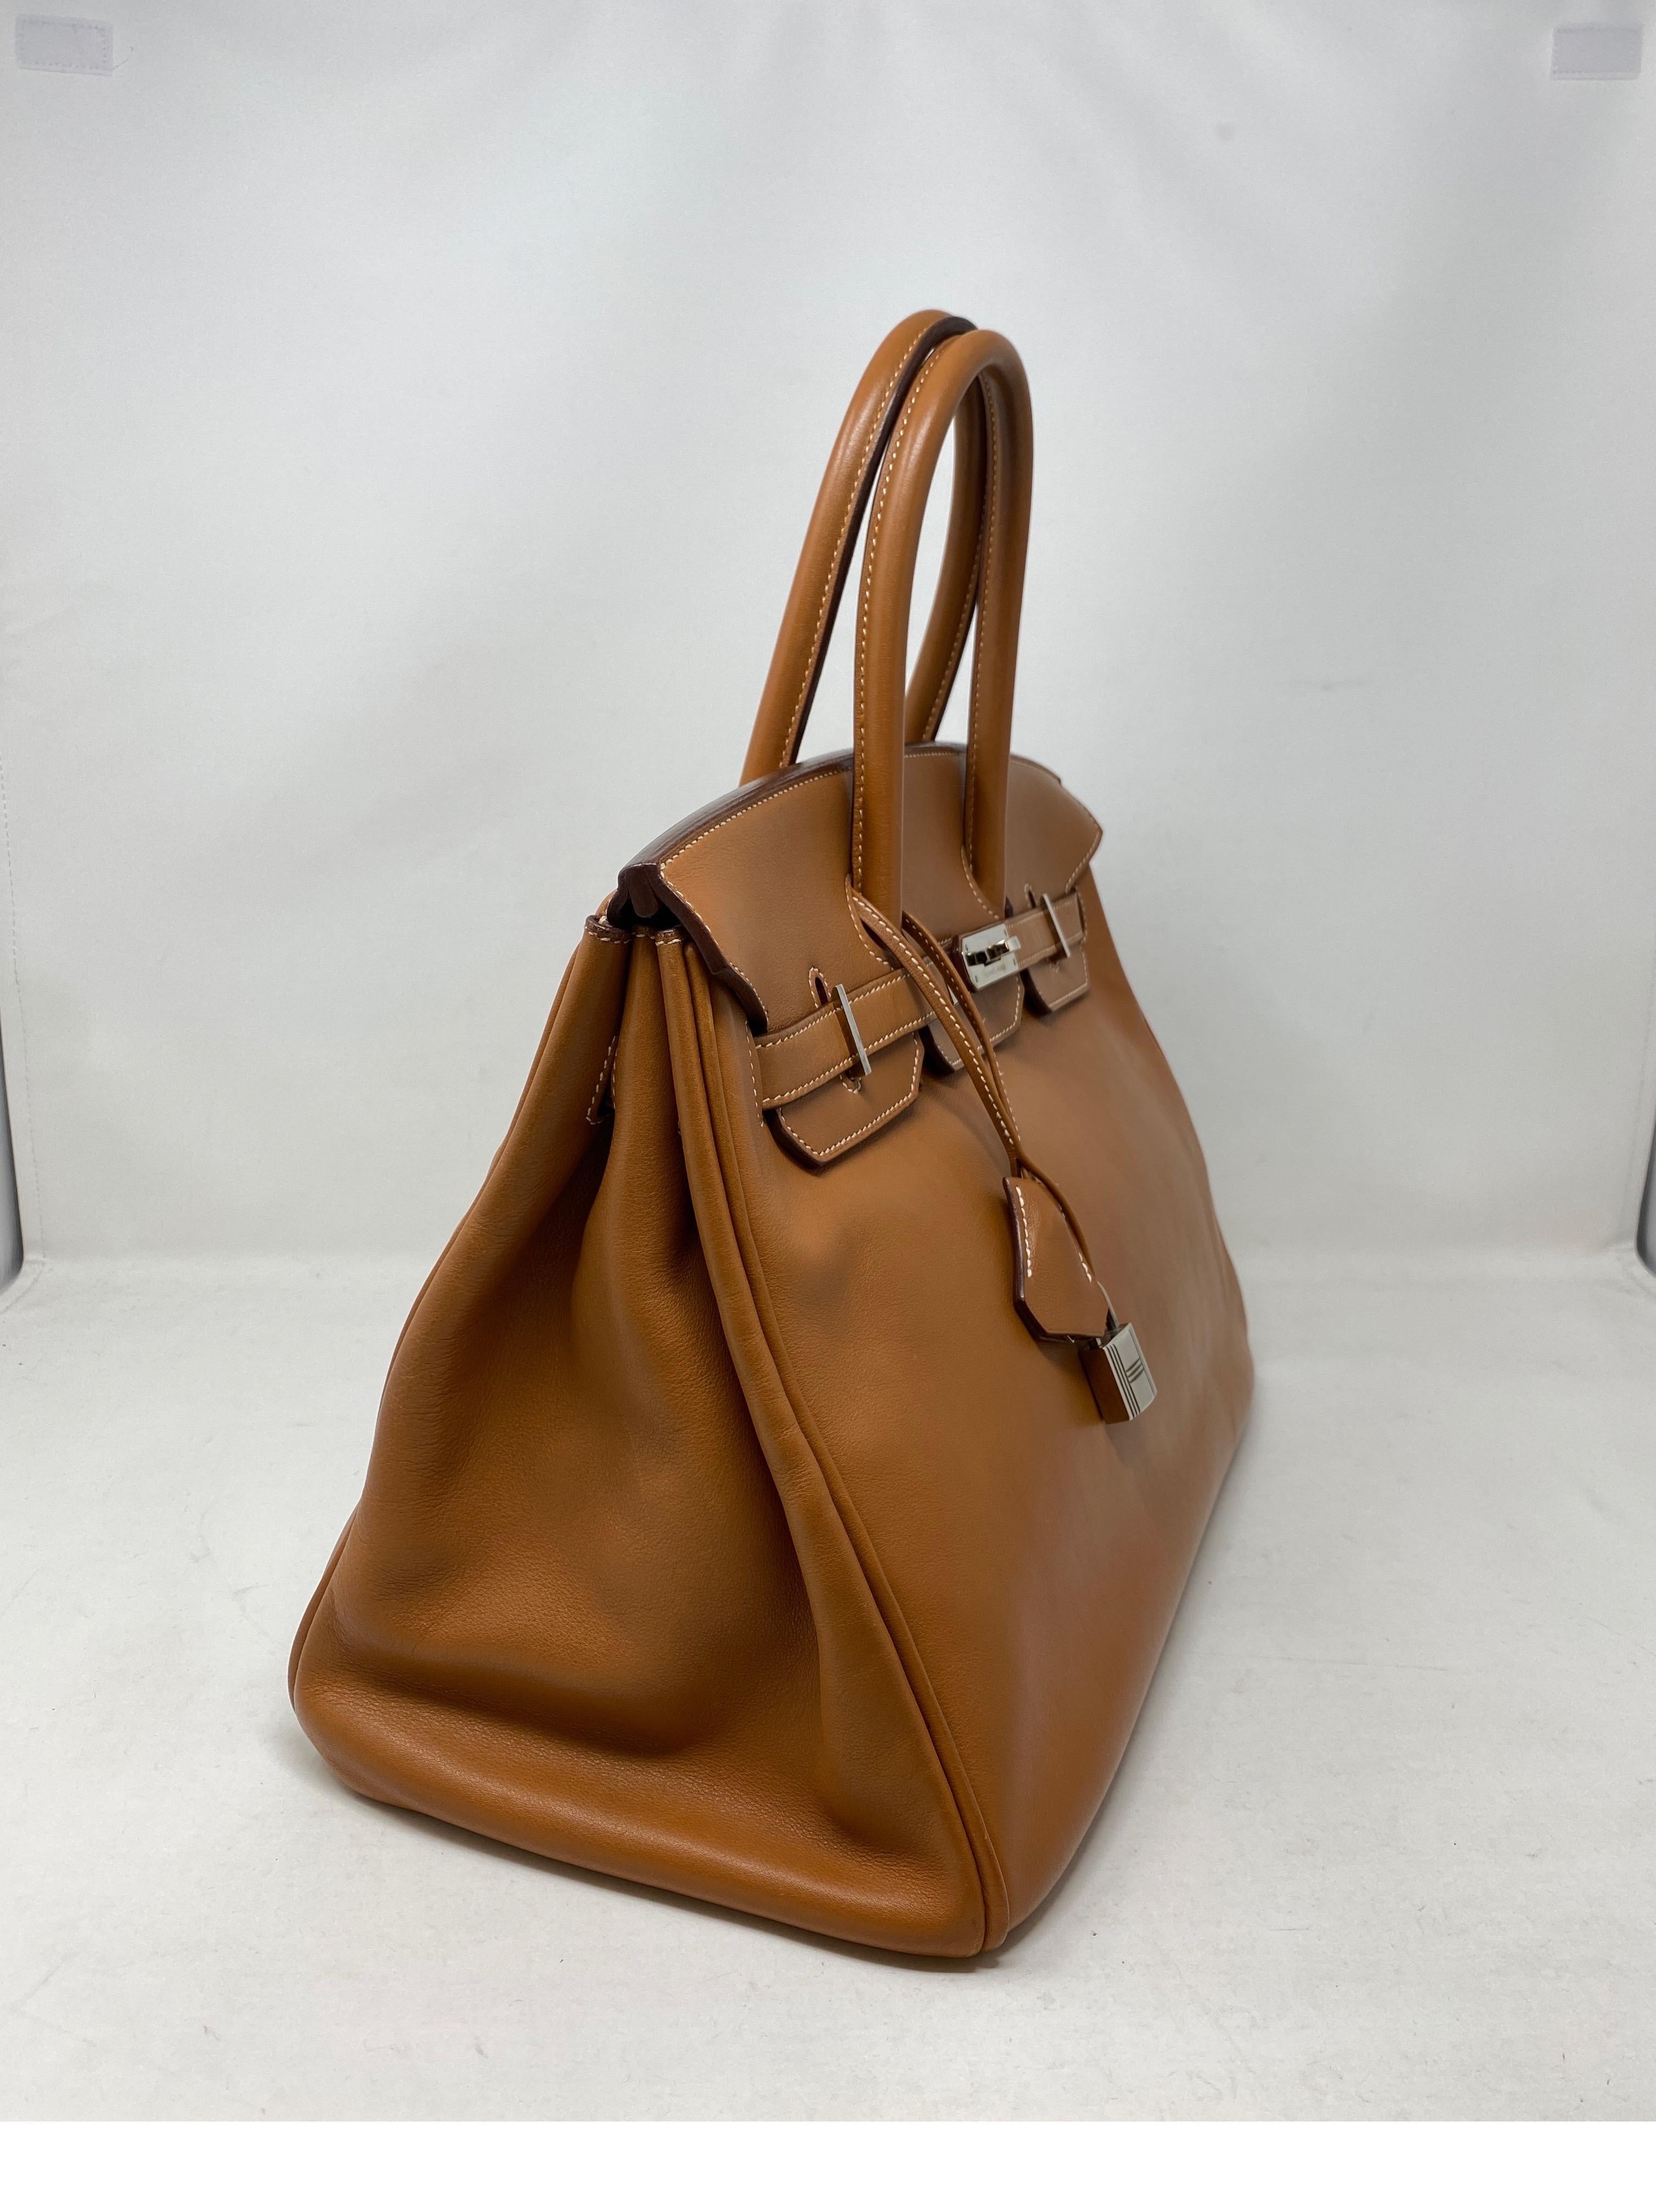 Hermes Gold Birkin Bag. Palladium hardware. Swift leather. Lovely vintage Birkin bag in good condition. Smooth swift leather. Gets better with age. The most wanted neutral color gold tan leather. Includes clochette, lock, keys, and dust cover.